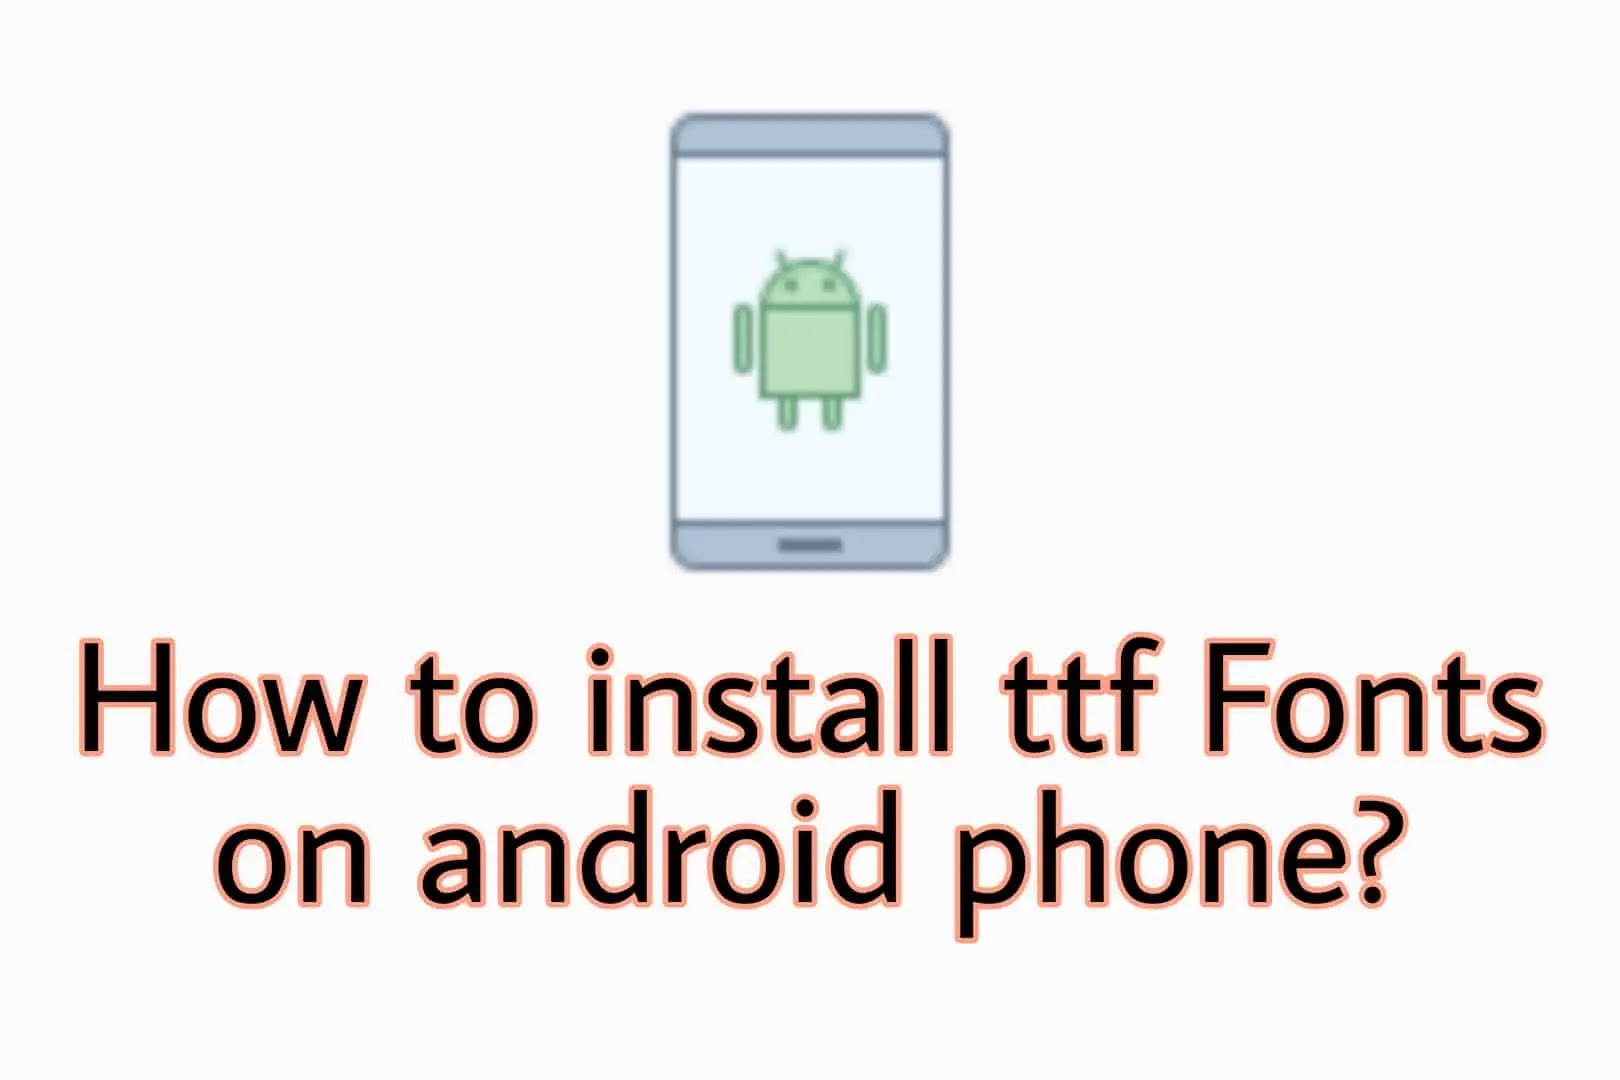 How To Install Ttf Fonts on Android Without Root